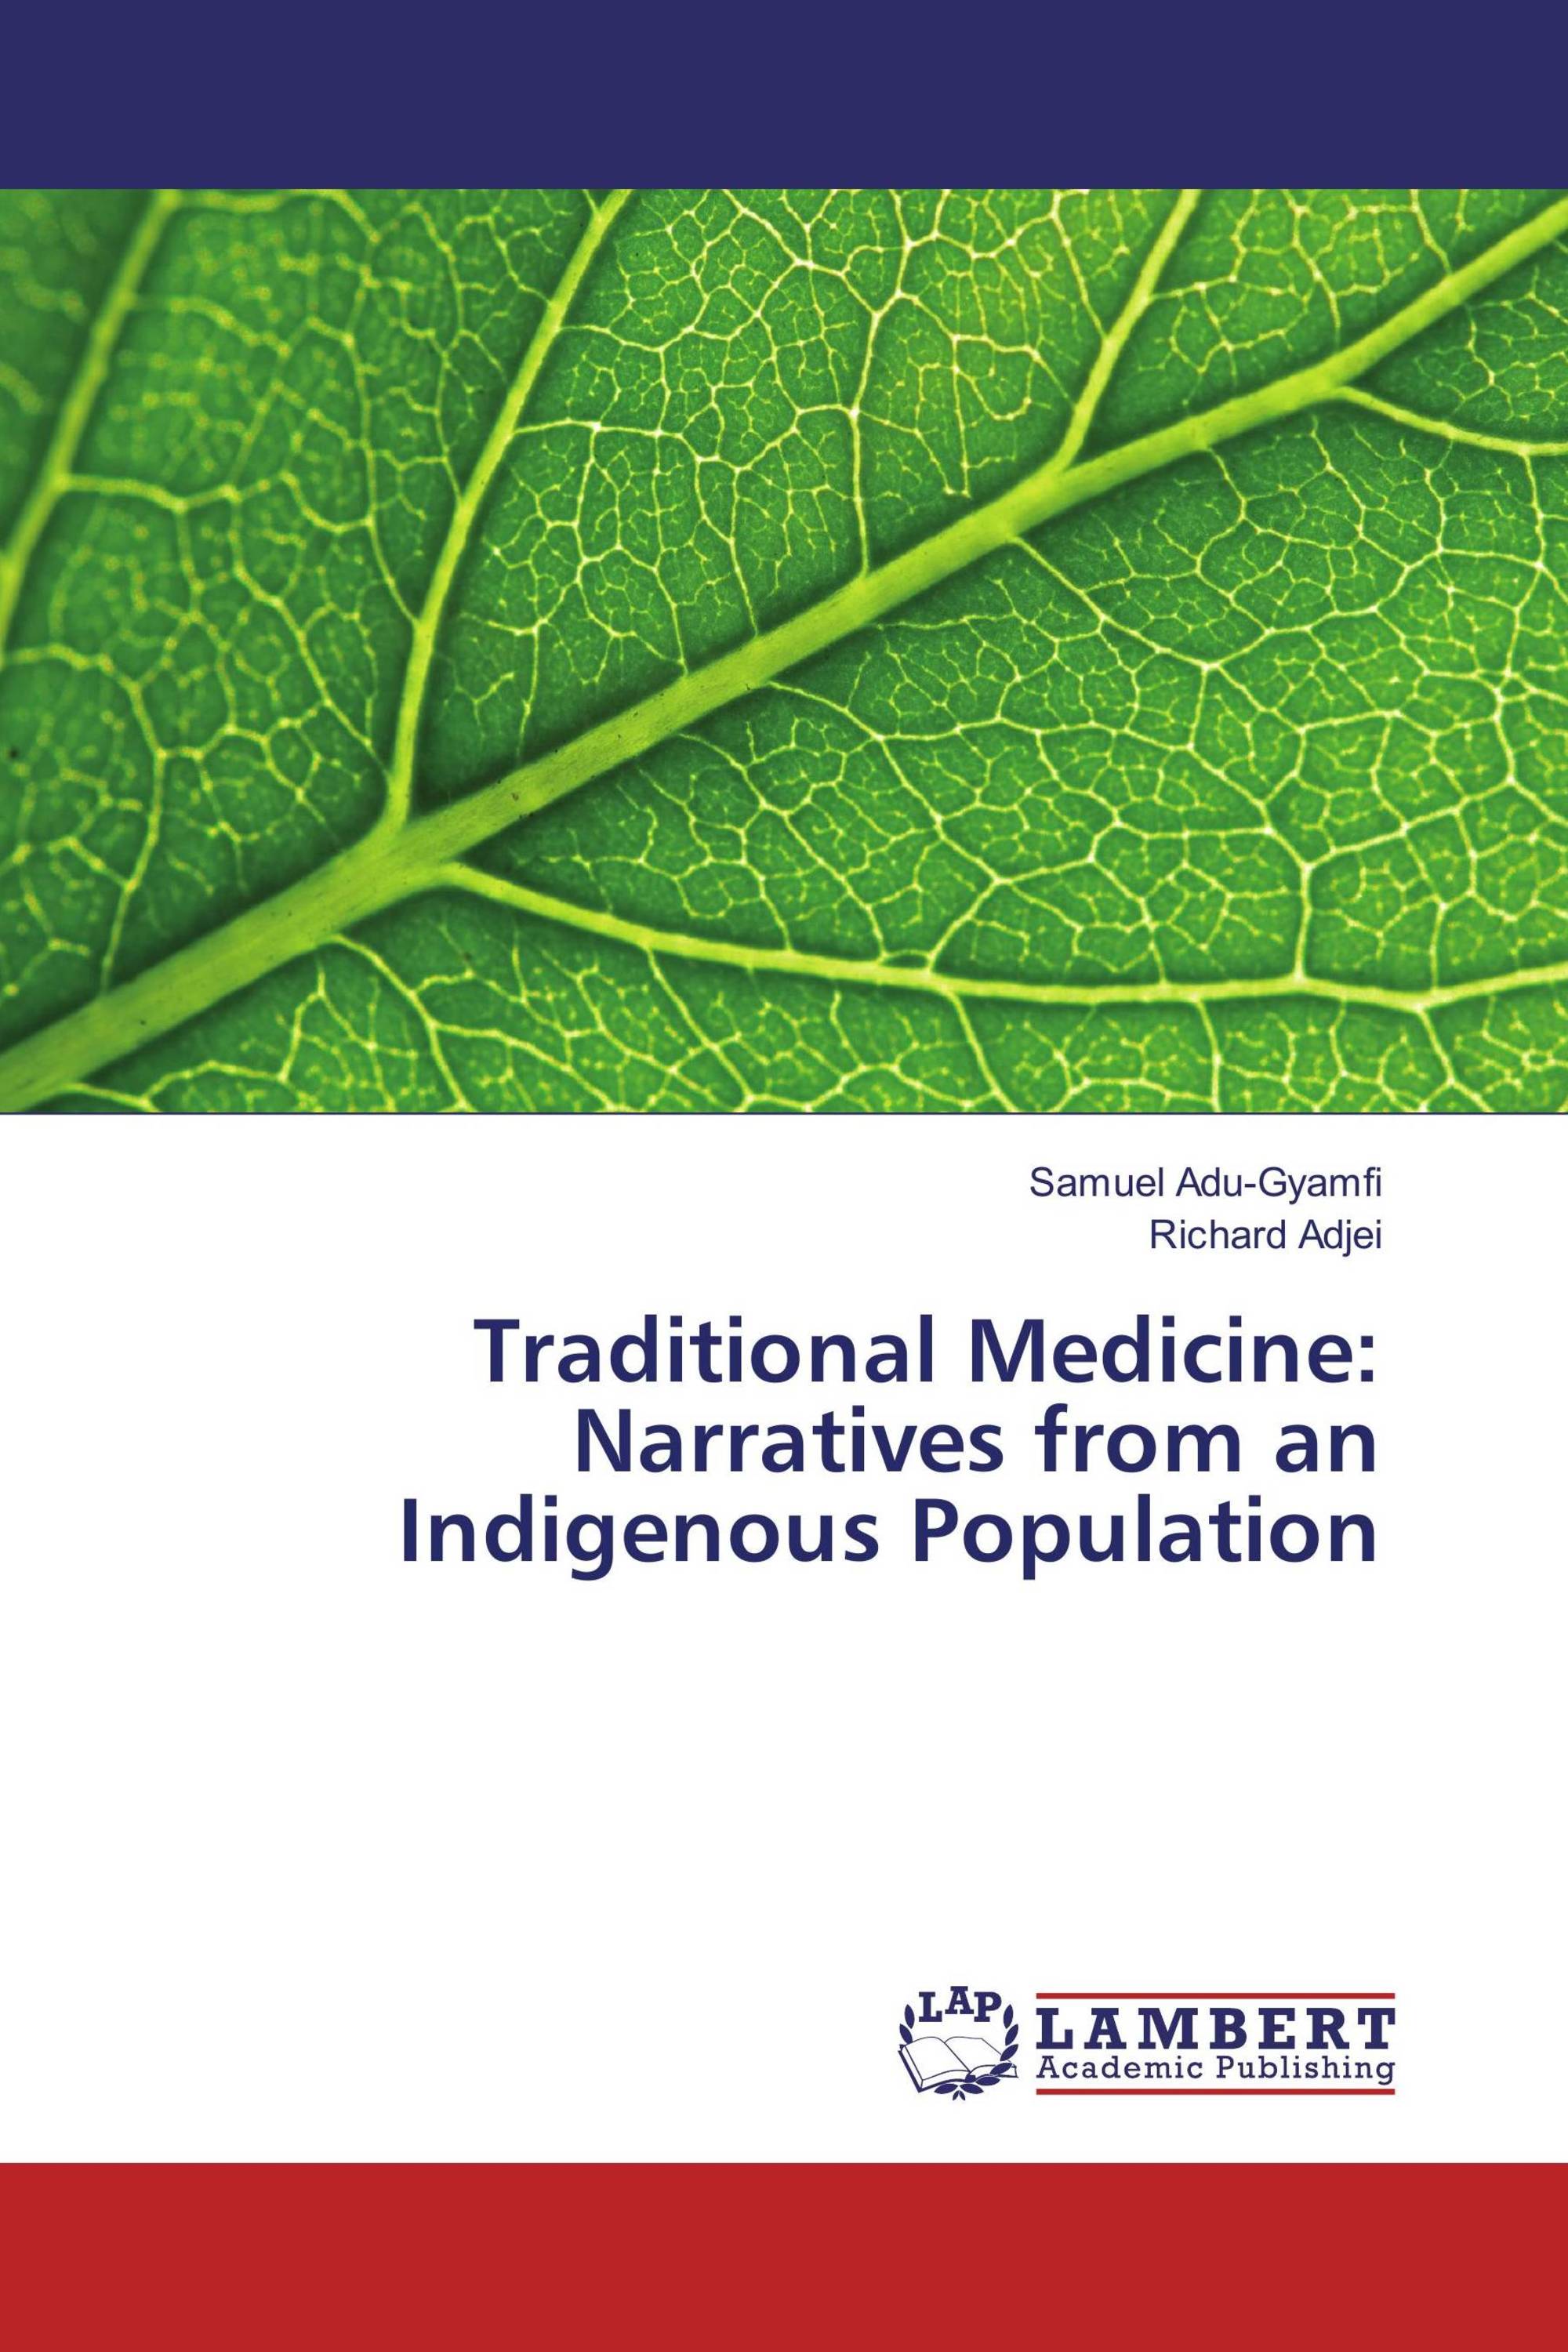 research papers on indigenous medicine